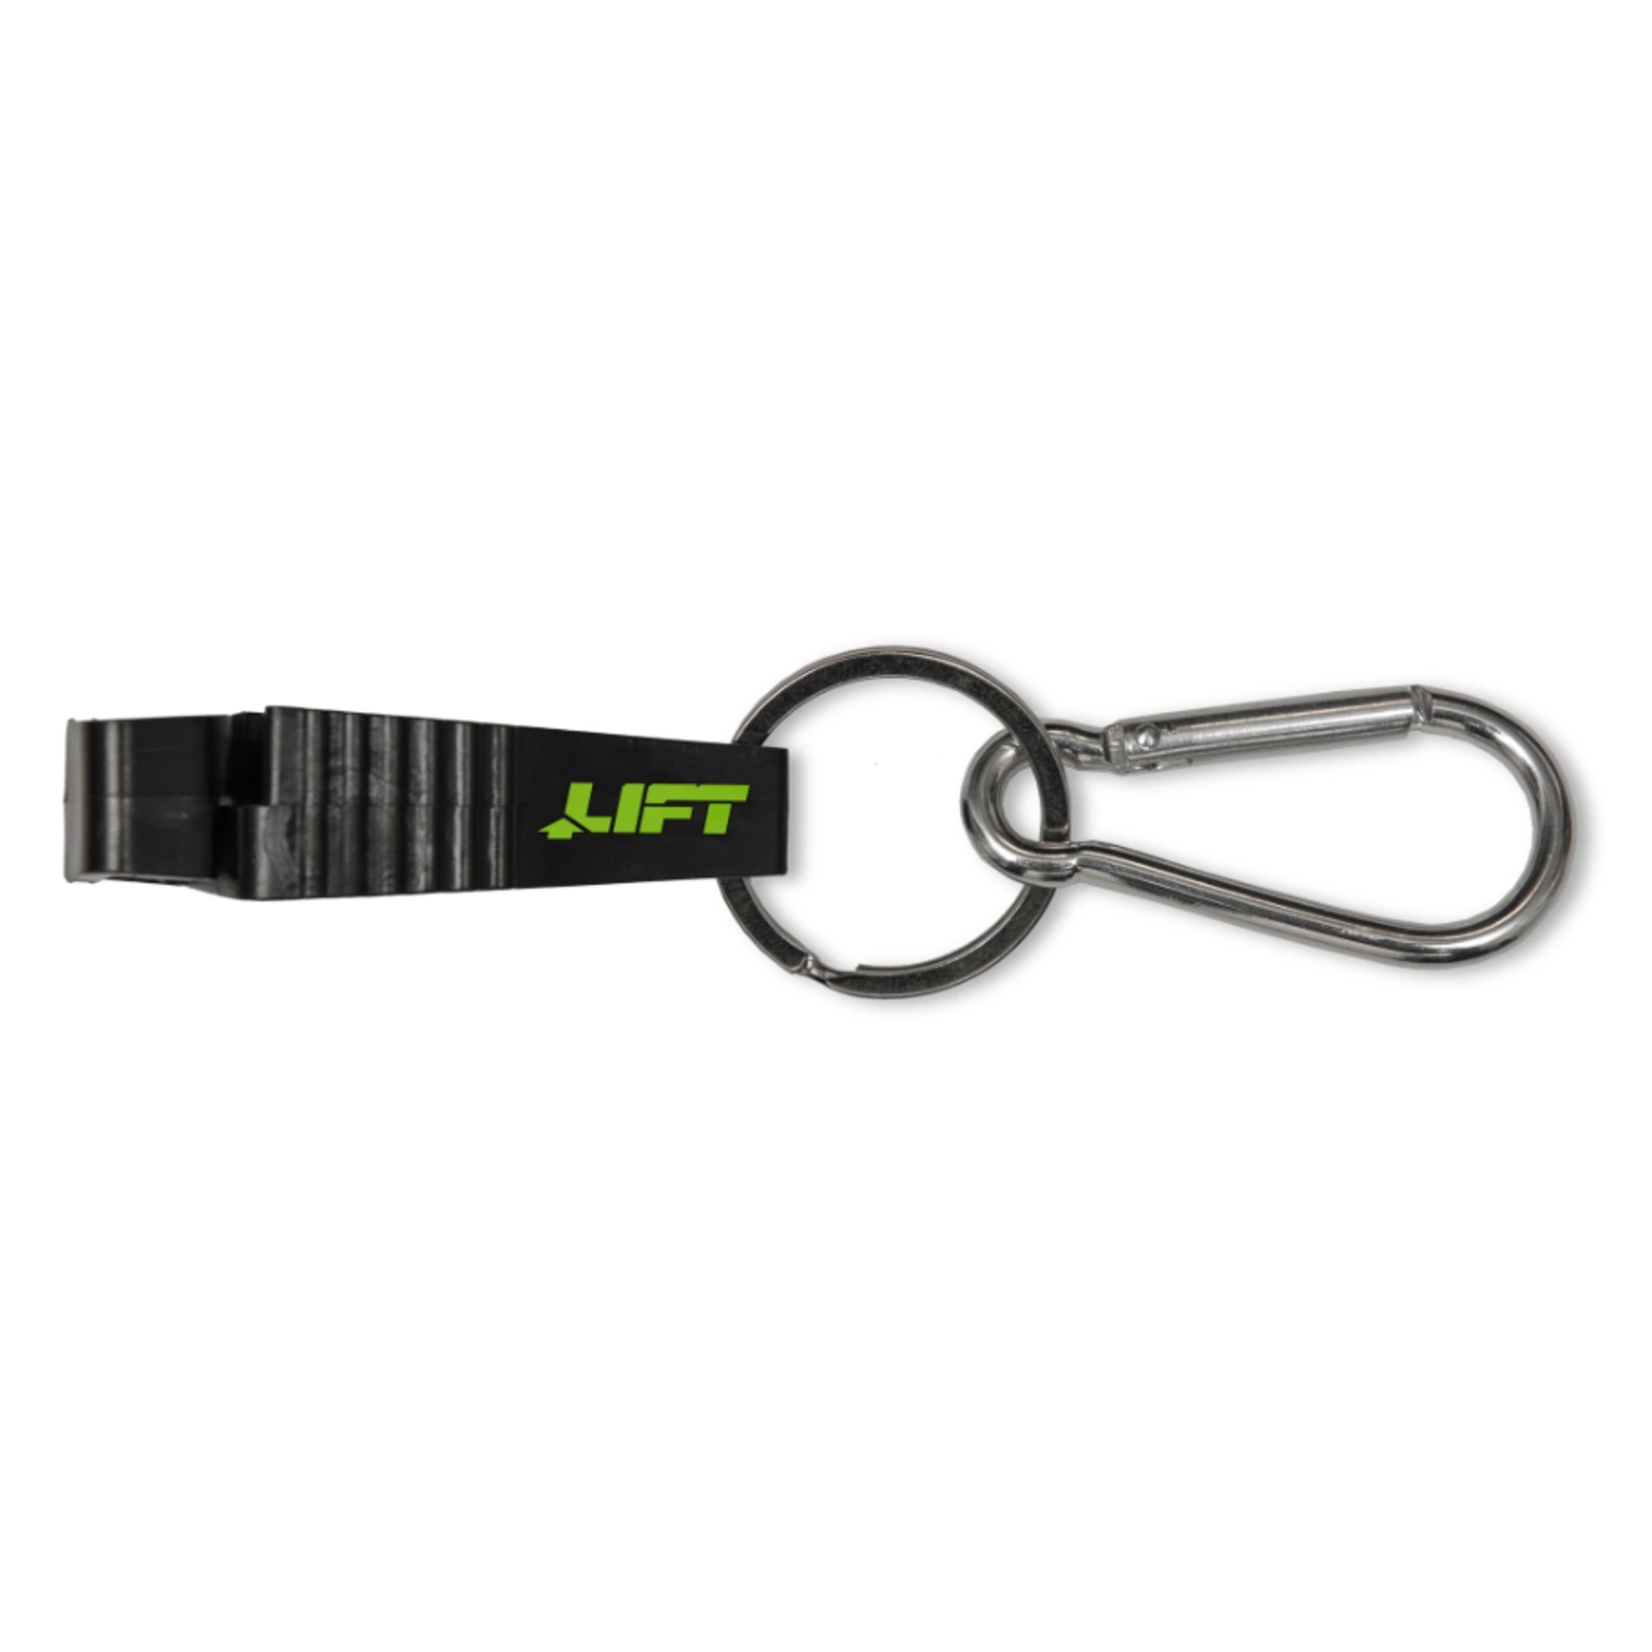 Lift Safety Glove Clip with Carabiner (AGC-19K)